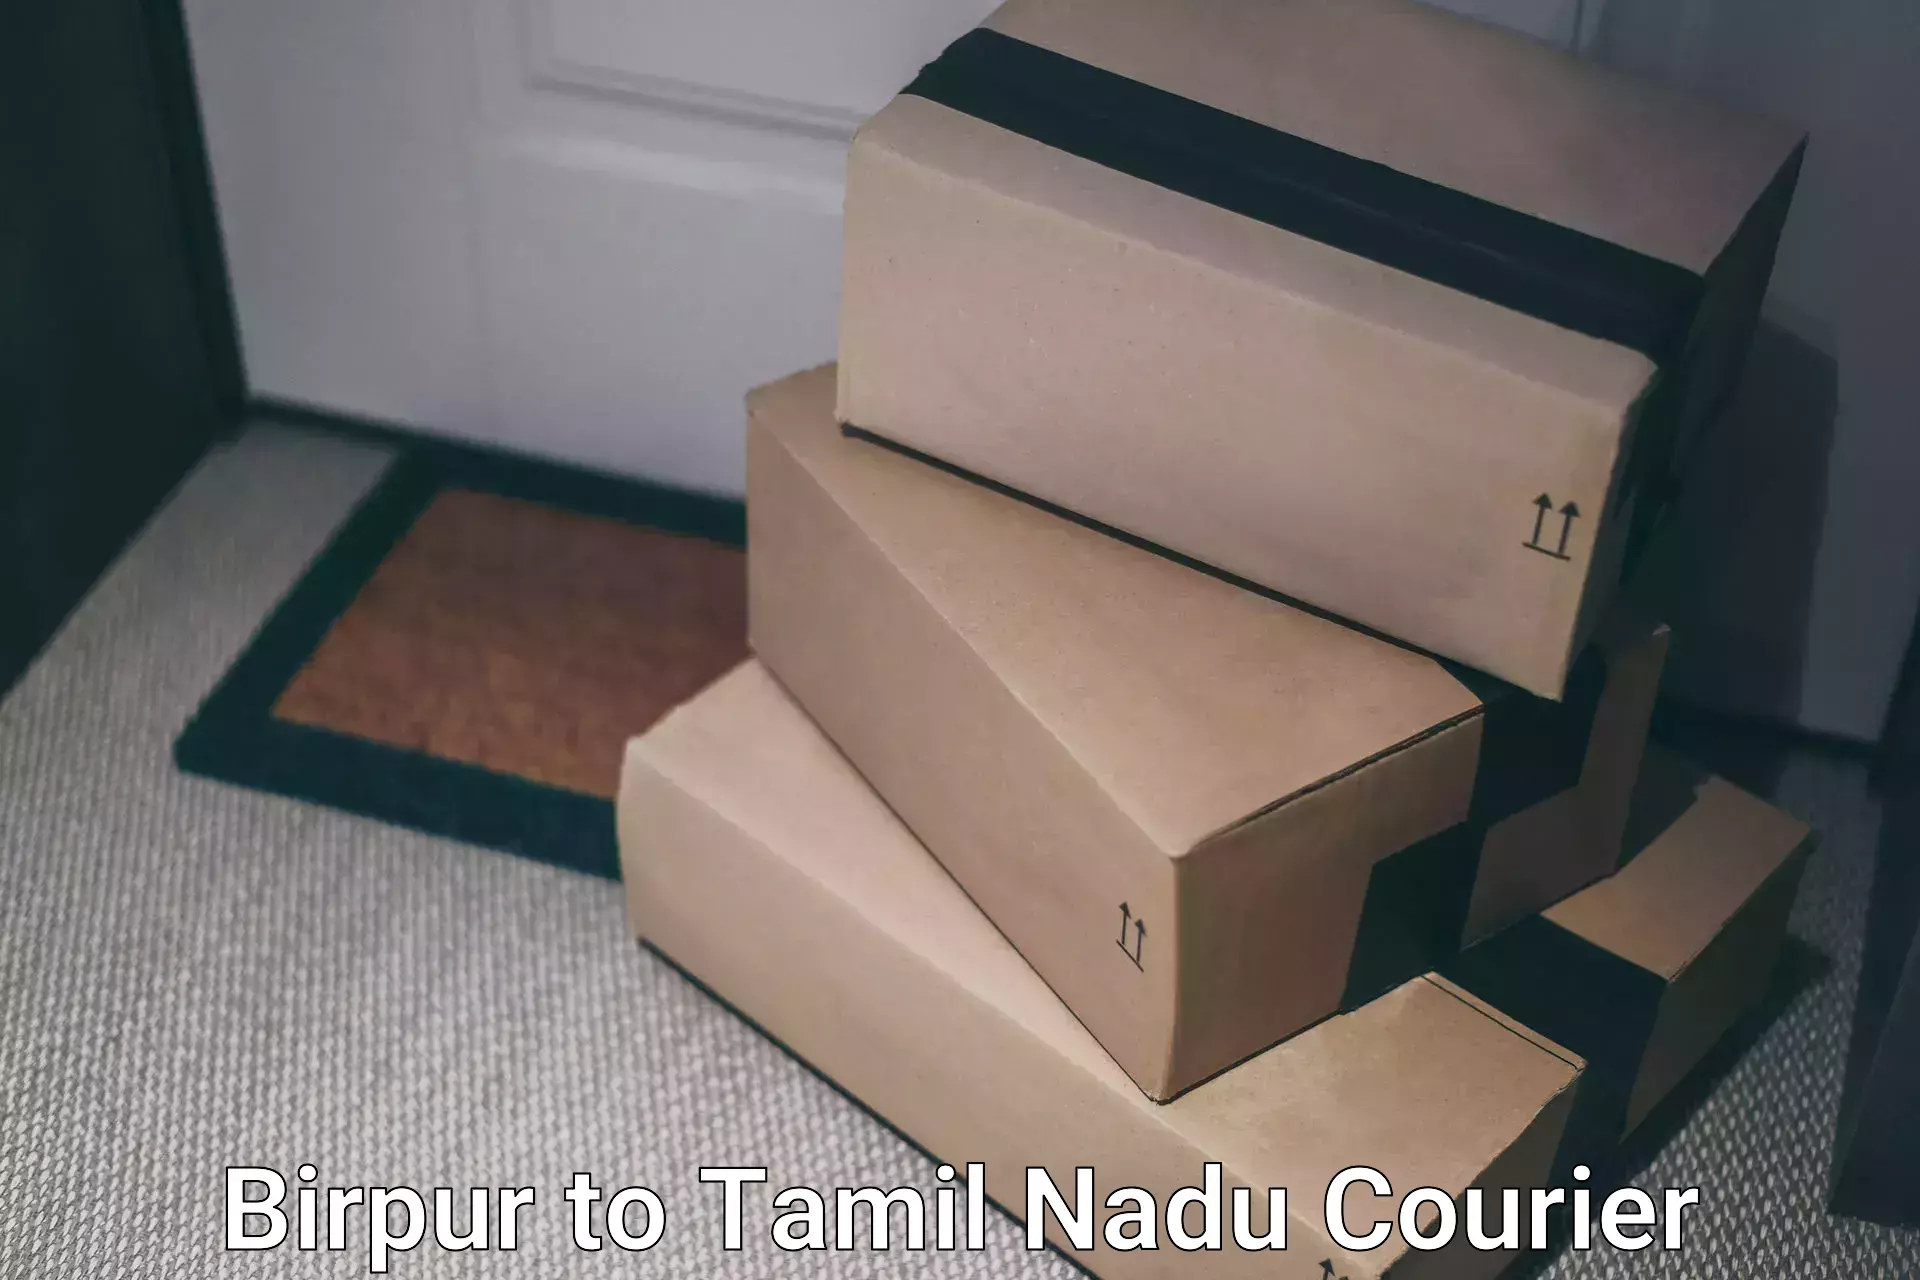 On-call courier service Birpur to Tamil Nadu